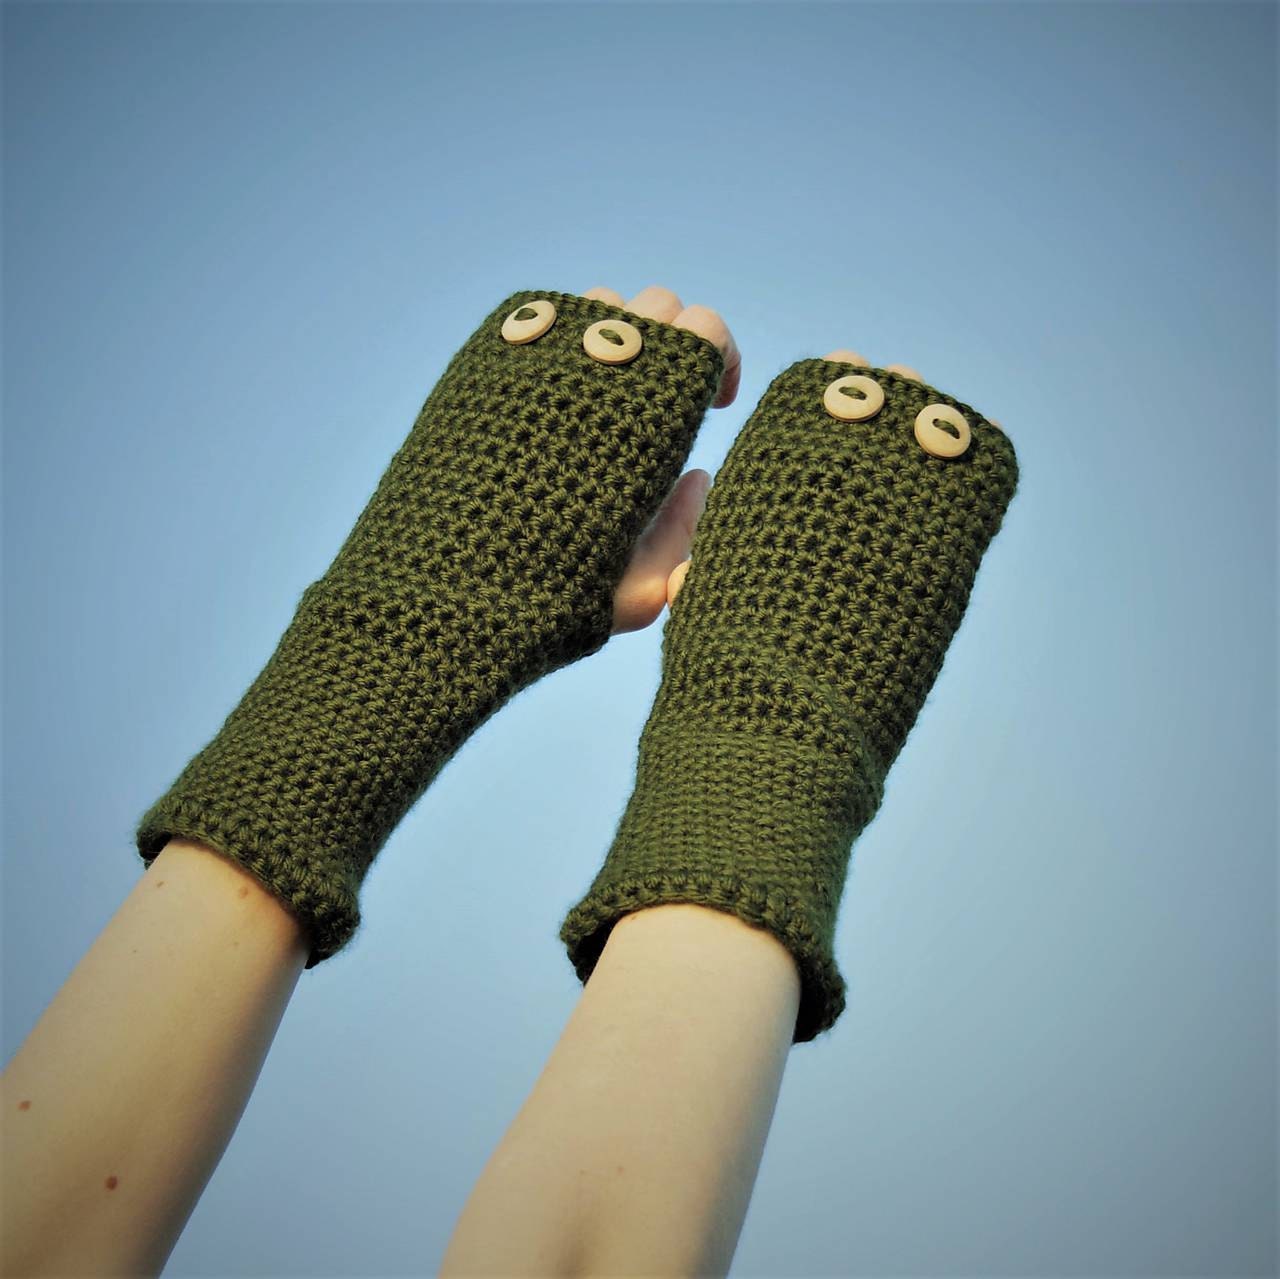 GREEN OWL FINGERLESS GLOVES arm warmers forest bird chunky cable knit XS S Y1 